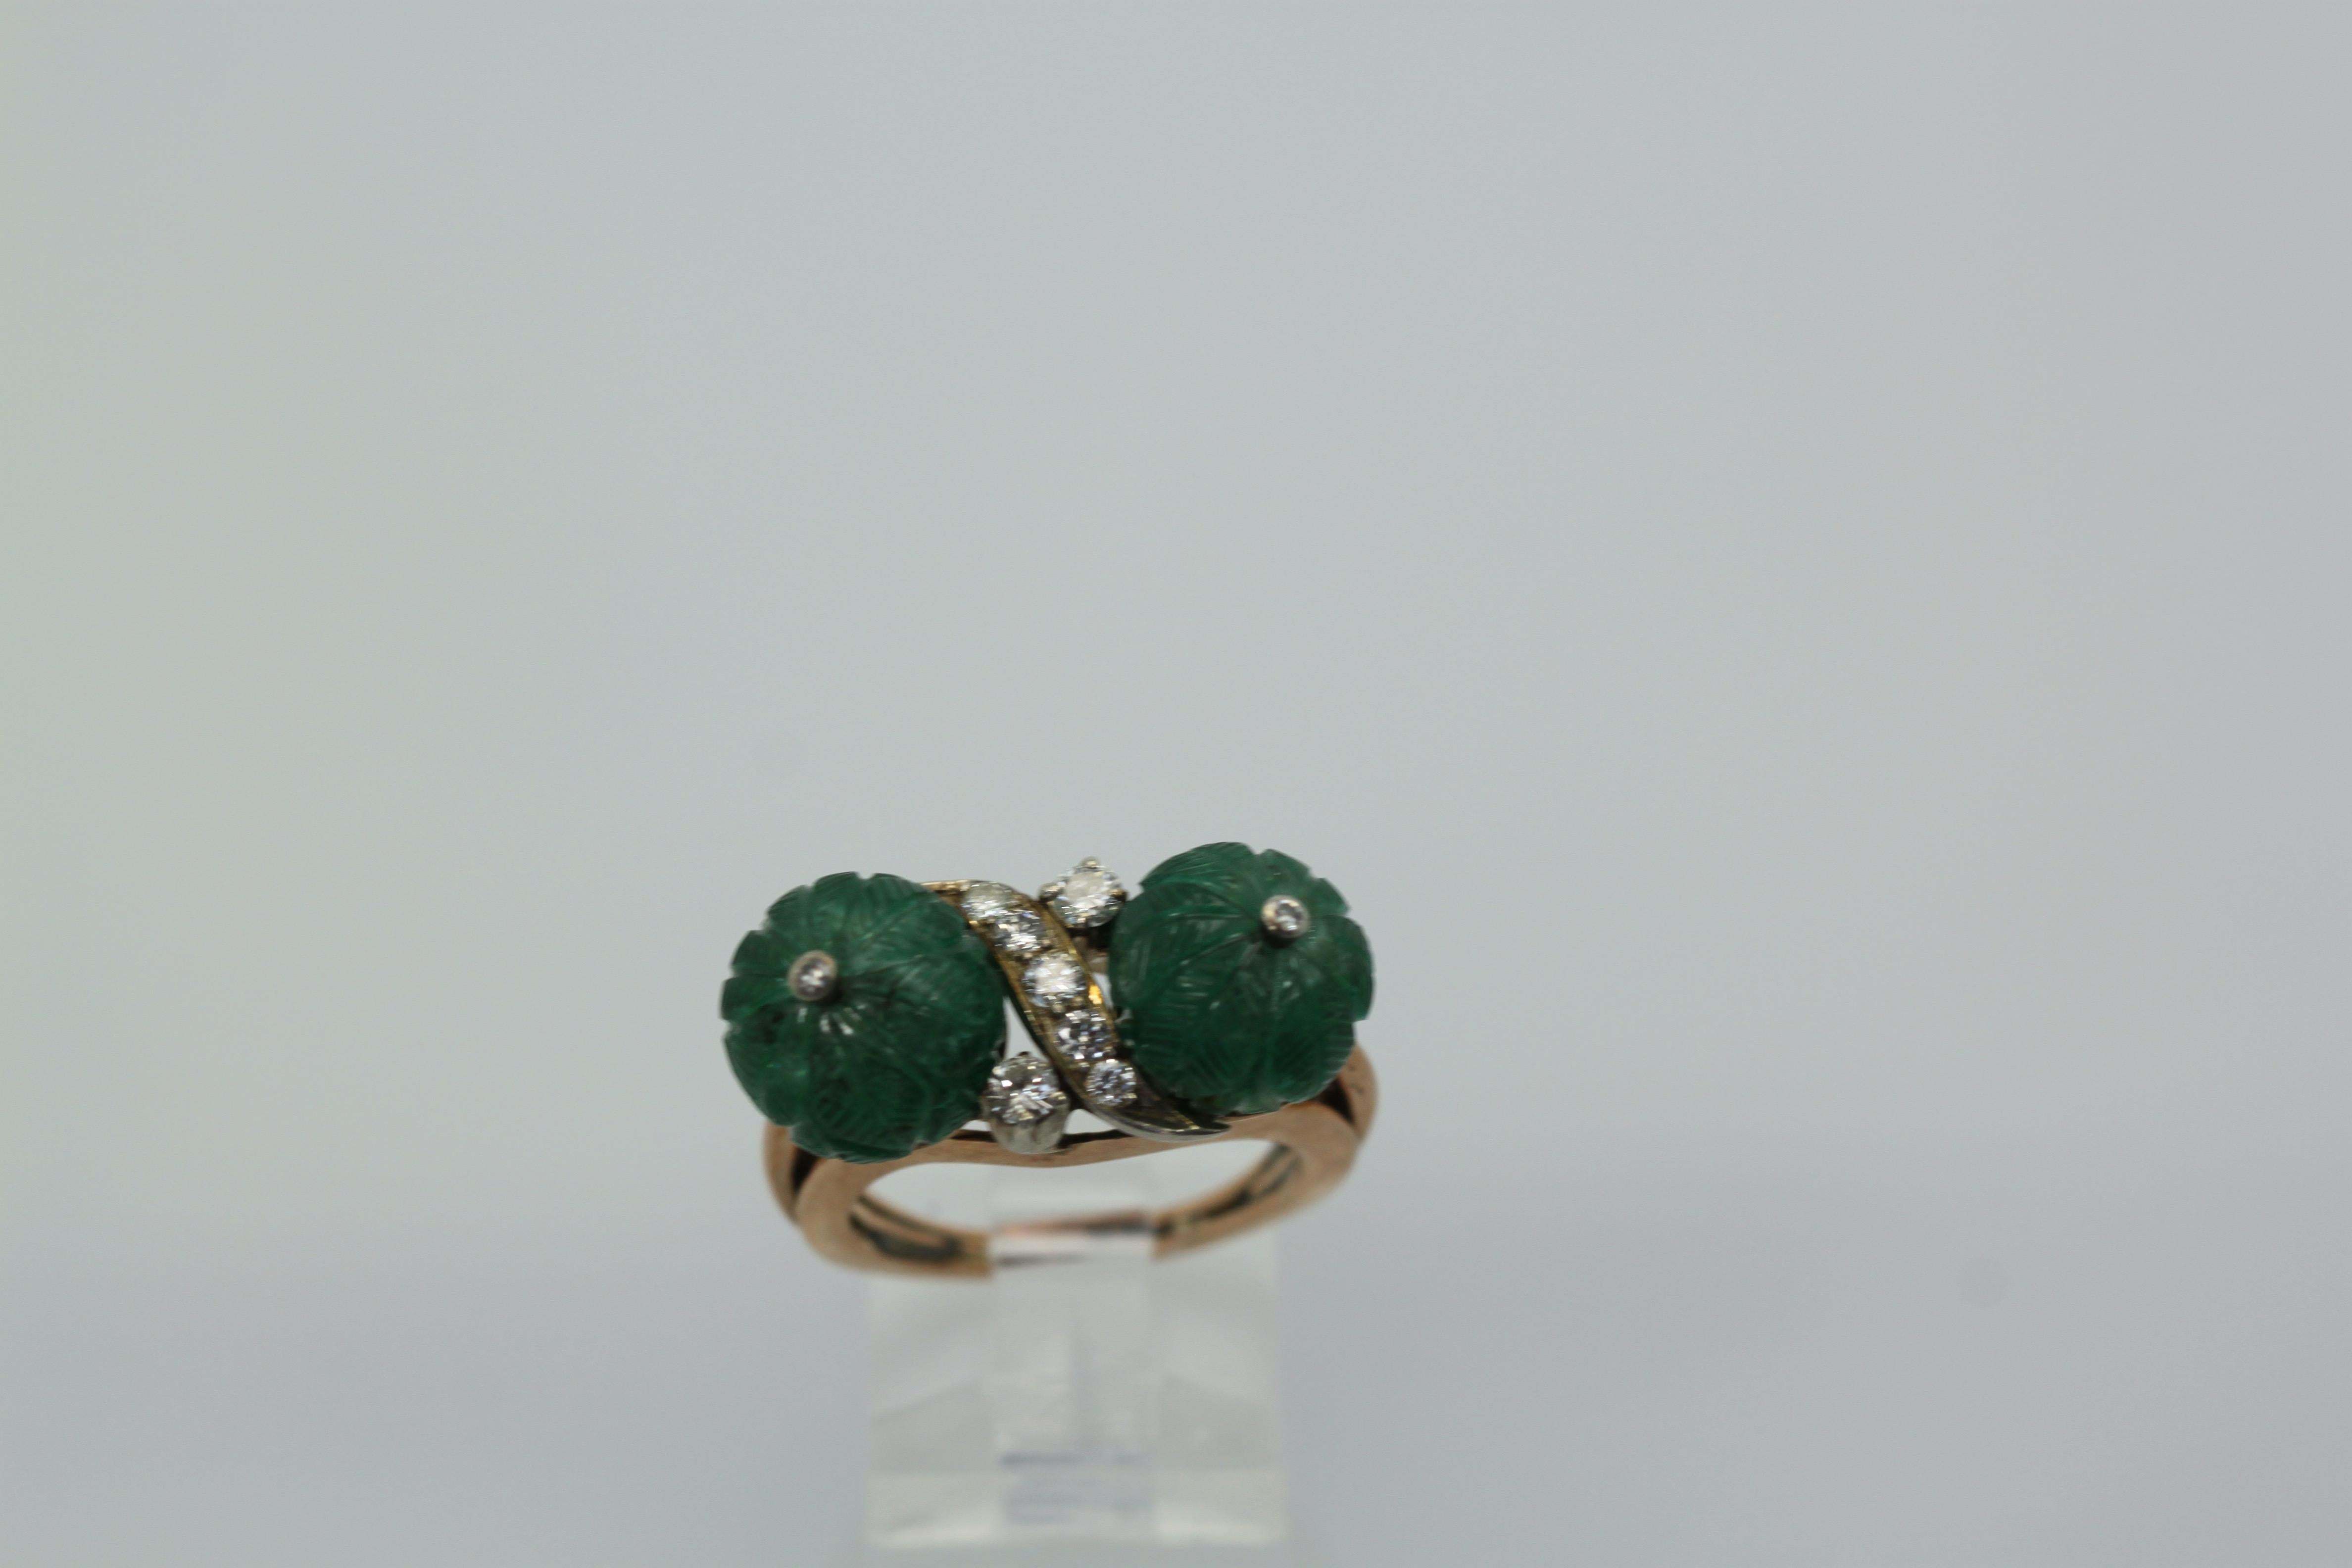 This Emerald Double Carved Diamond Ring is lovely and features two Emerald 